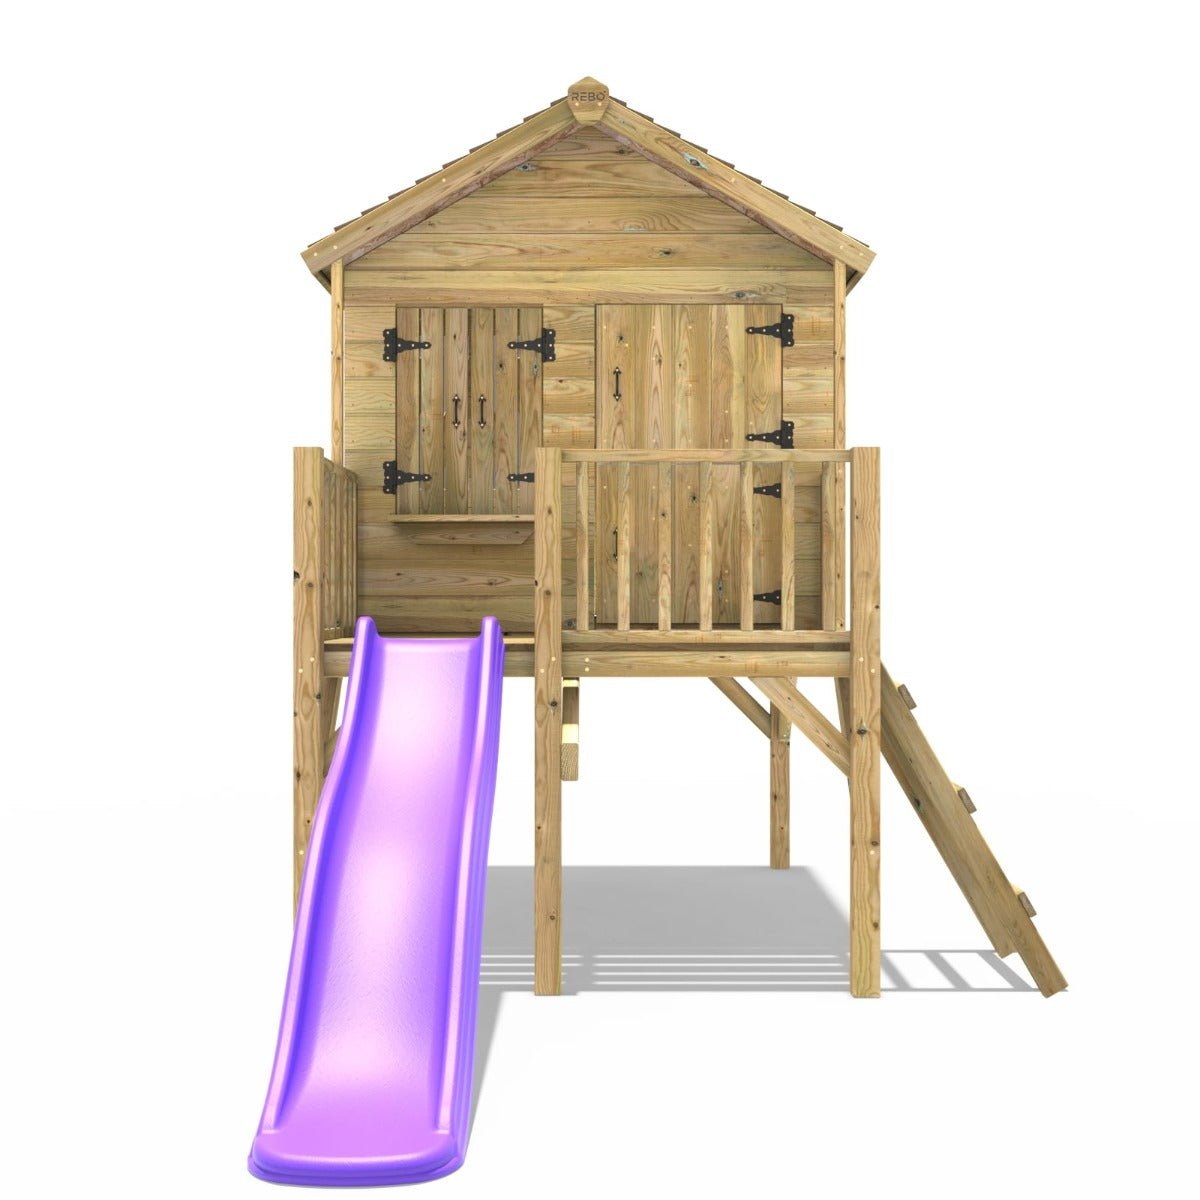 Rebo 5FT x 5FT Childrens Wooden Garden Playhouse on Deck with 6ft Slide - Nightingale Purple